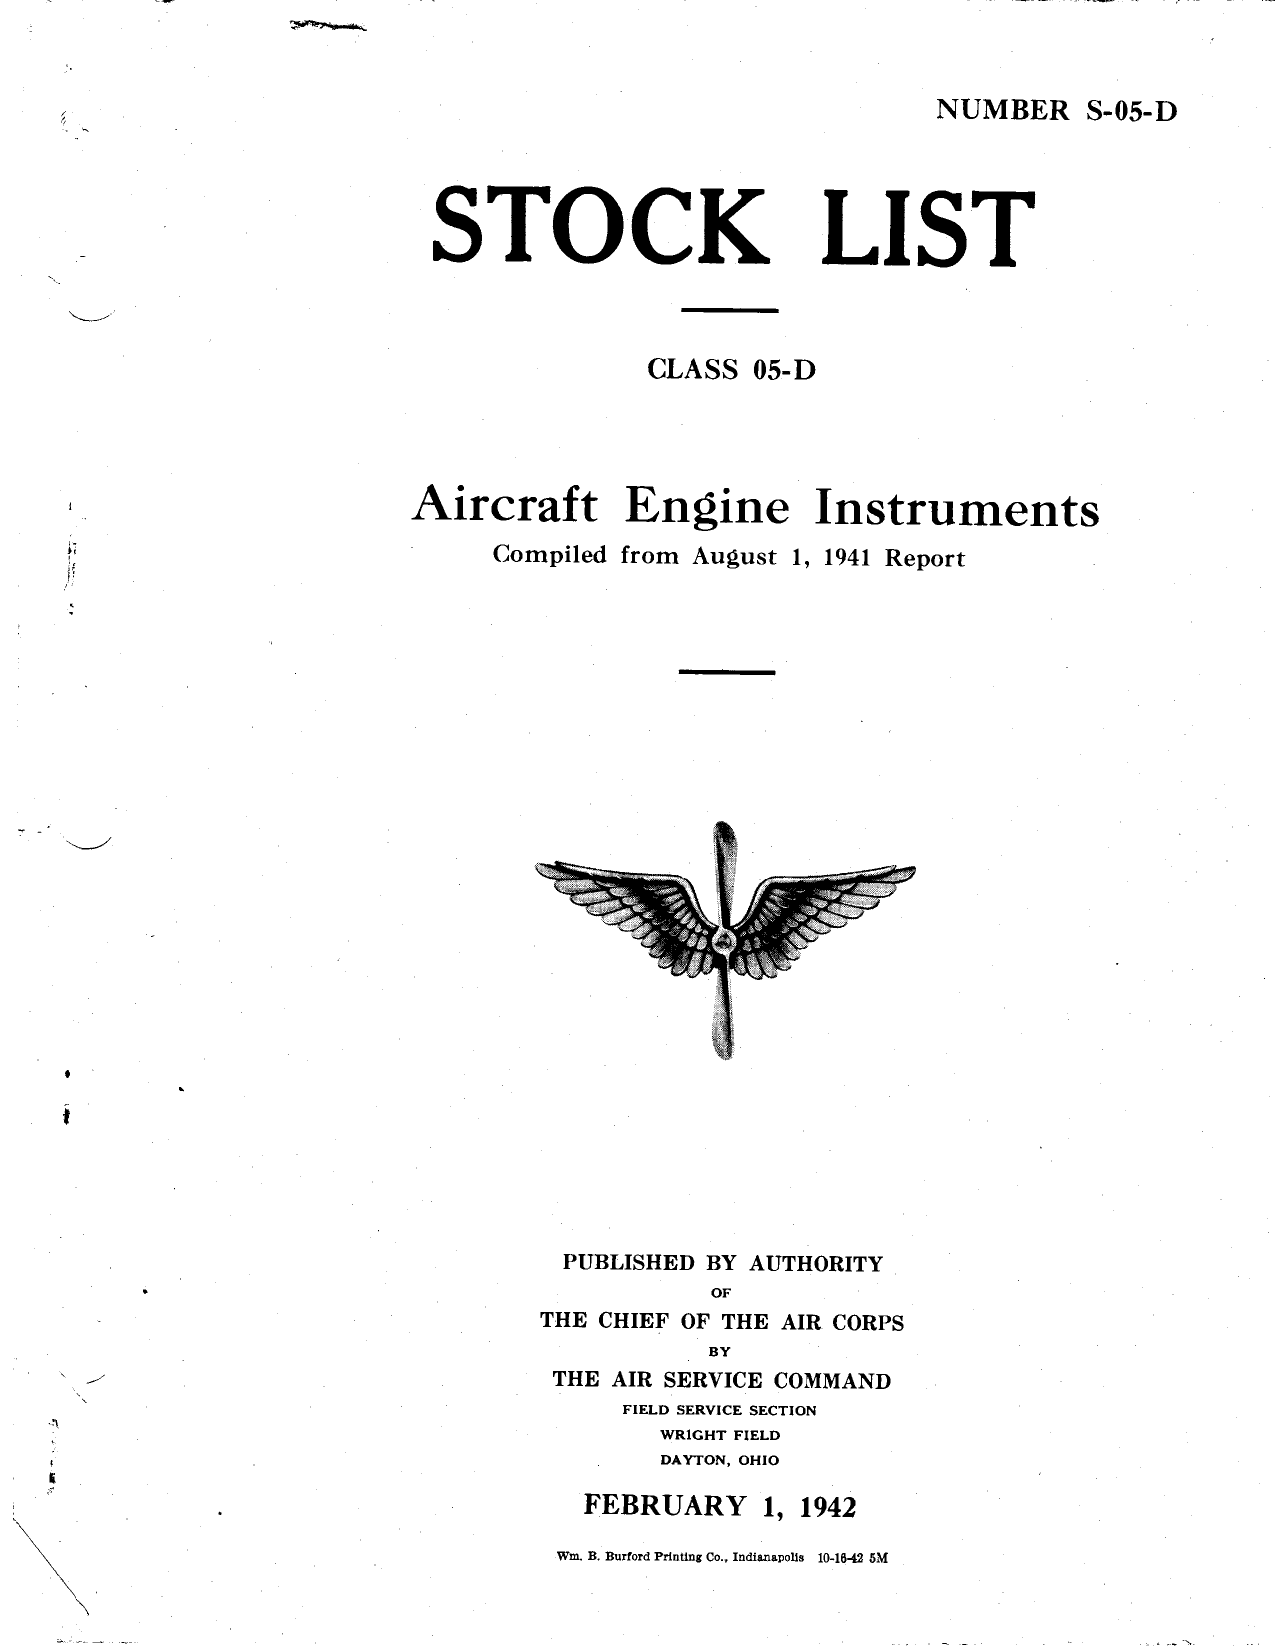 Sample page 1 from AirCorps Library document: Stock List for Aircraft Engine Instruments